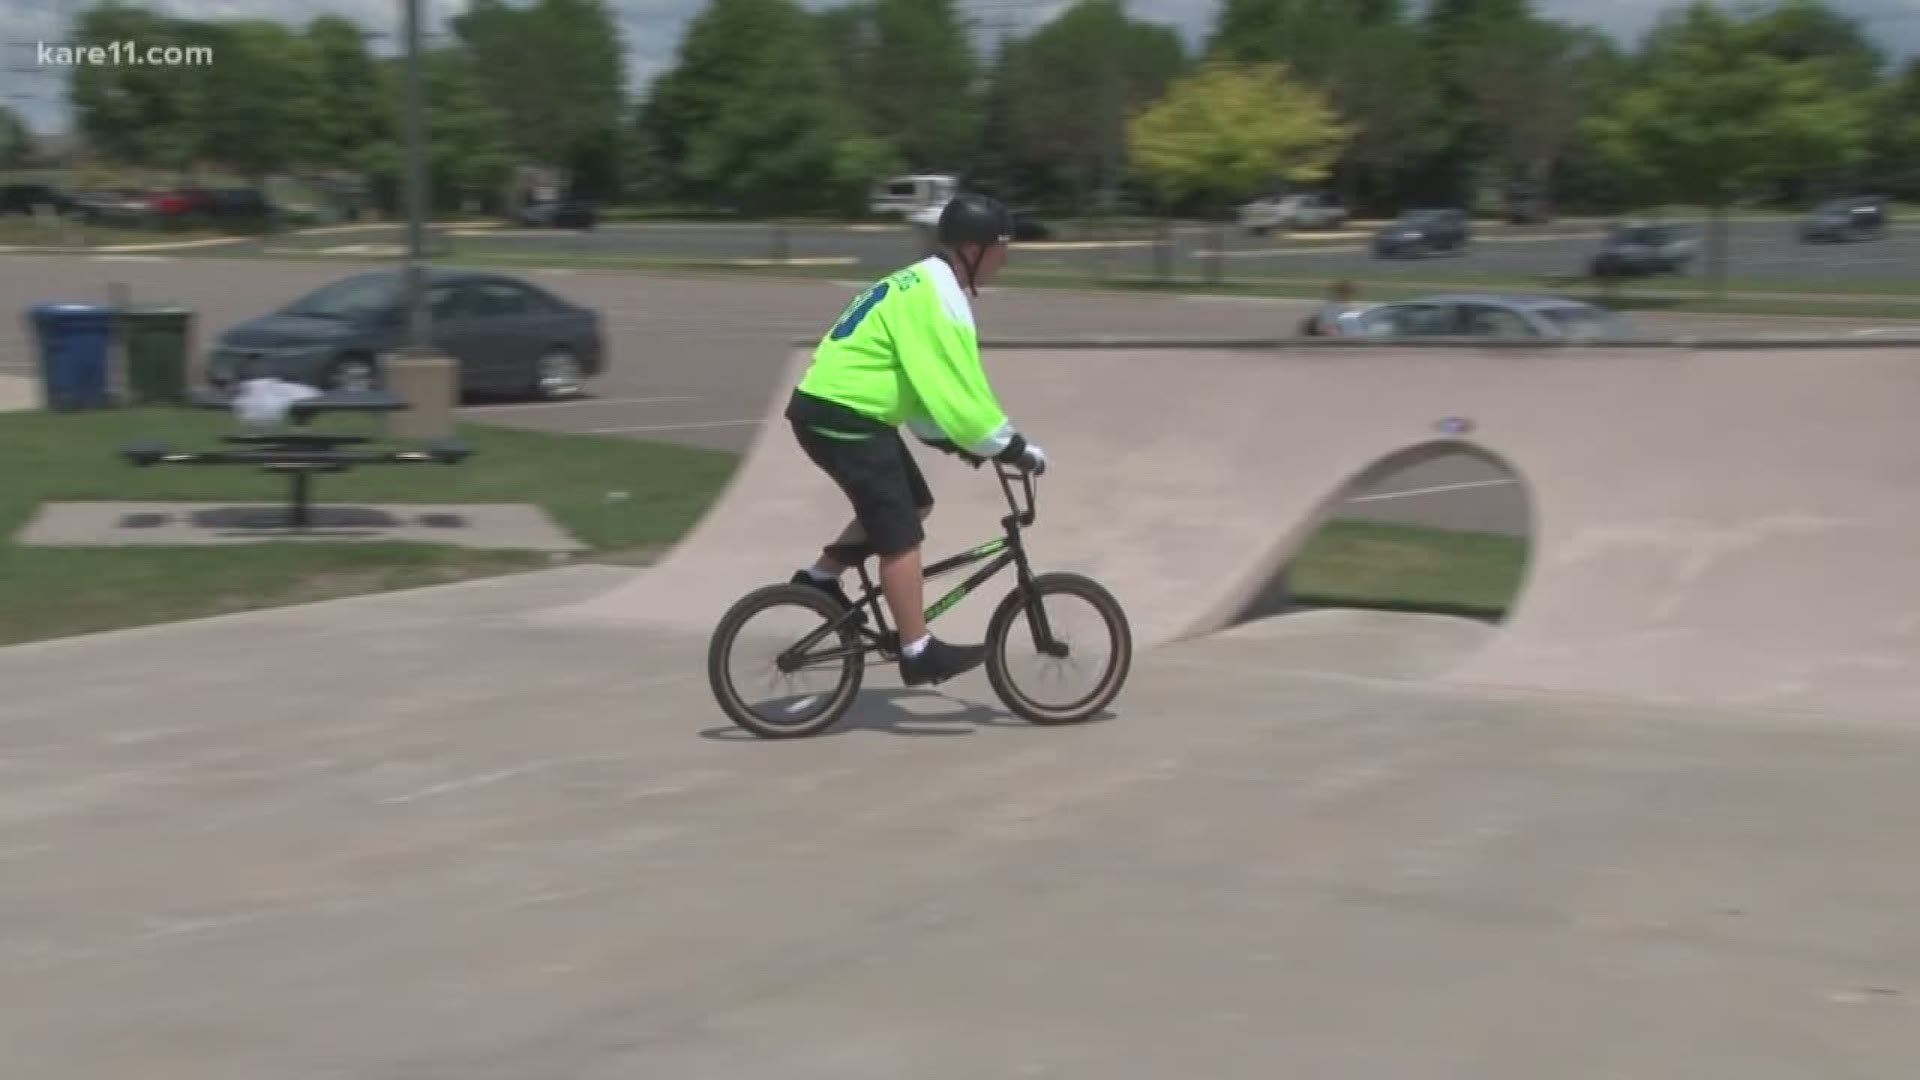 Chris Fagerberg will participate in new event at X Games Minneapolis.